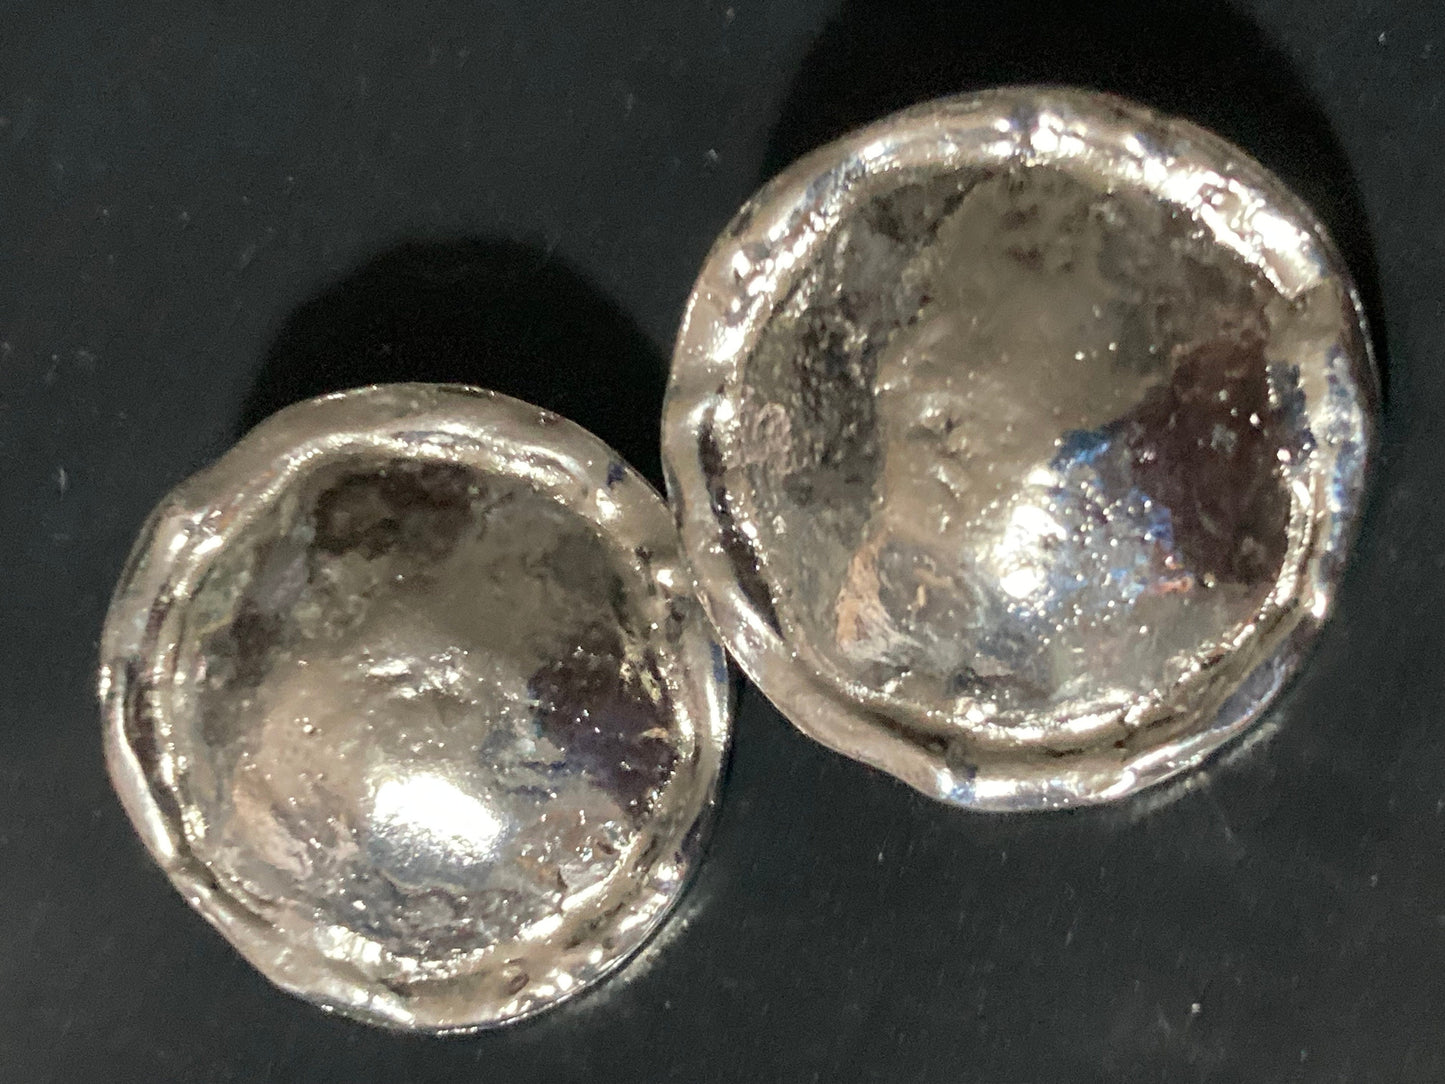 True vintage pristine oversized Silver plated metal 3.4cm round disc button earrings genuine period old shop stock